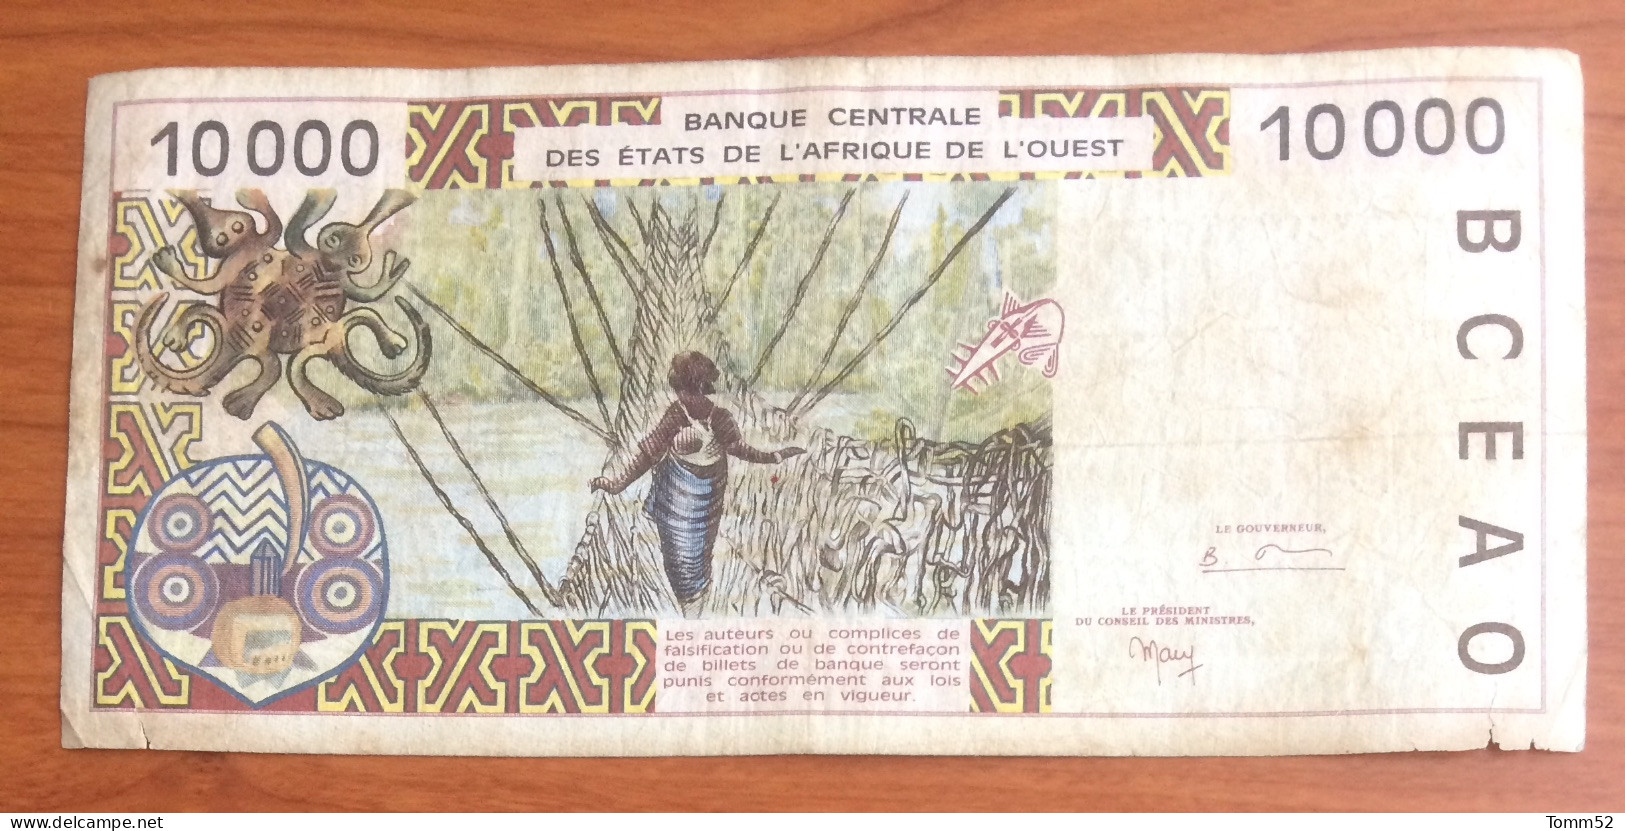 WAS- IVORY COAST 10000 Francs - West African States